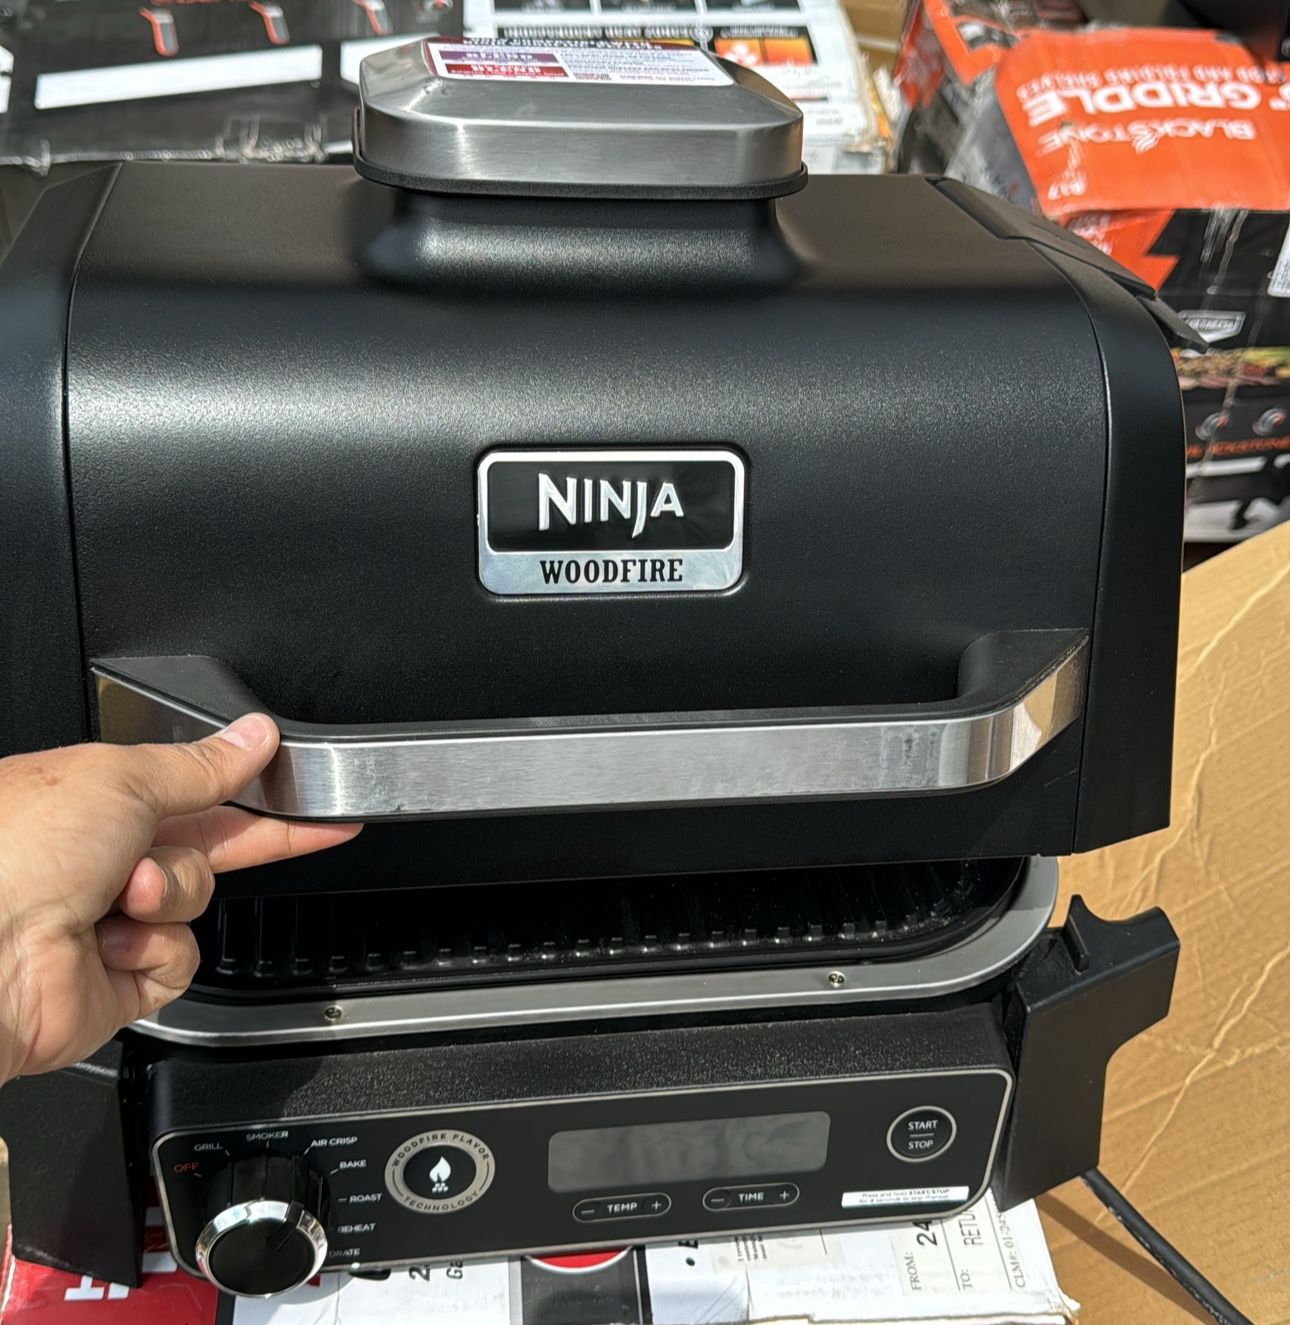 Ninja Woodfire 3-in-1 Outdoor Grill, Master Grill, BBQ Smoker, & Outdoor Air Fryer with Woodfire Technology,ñ